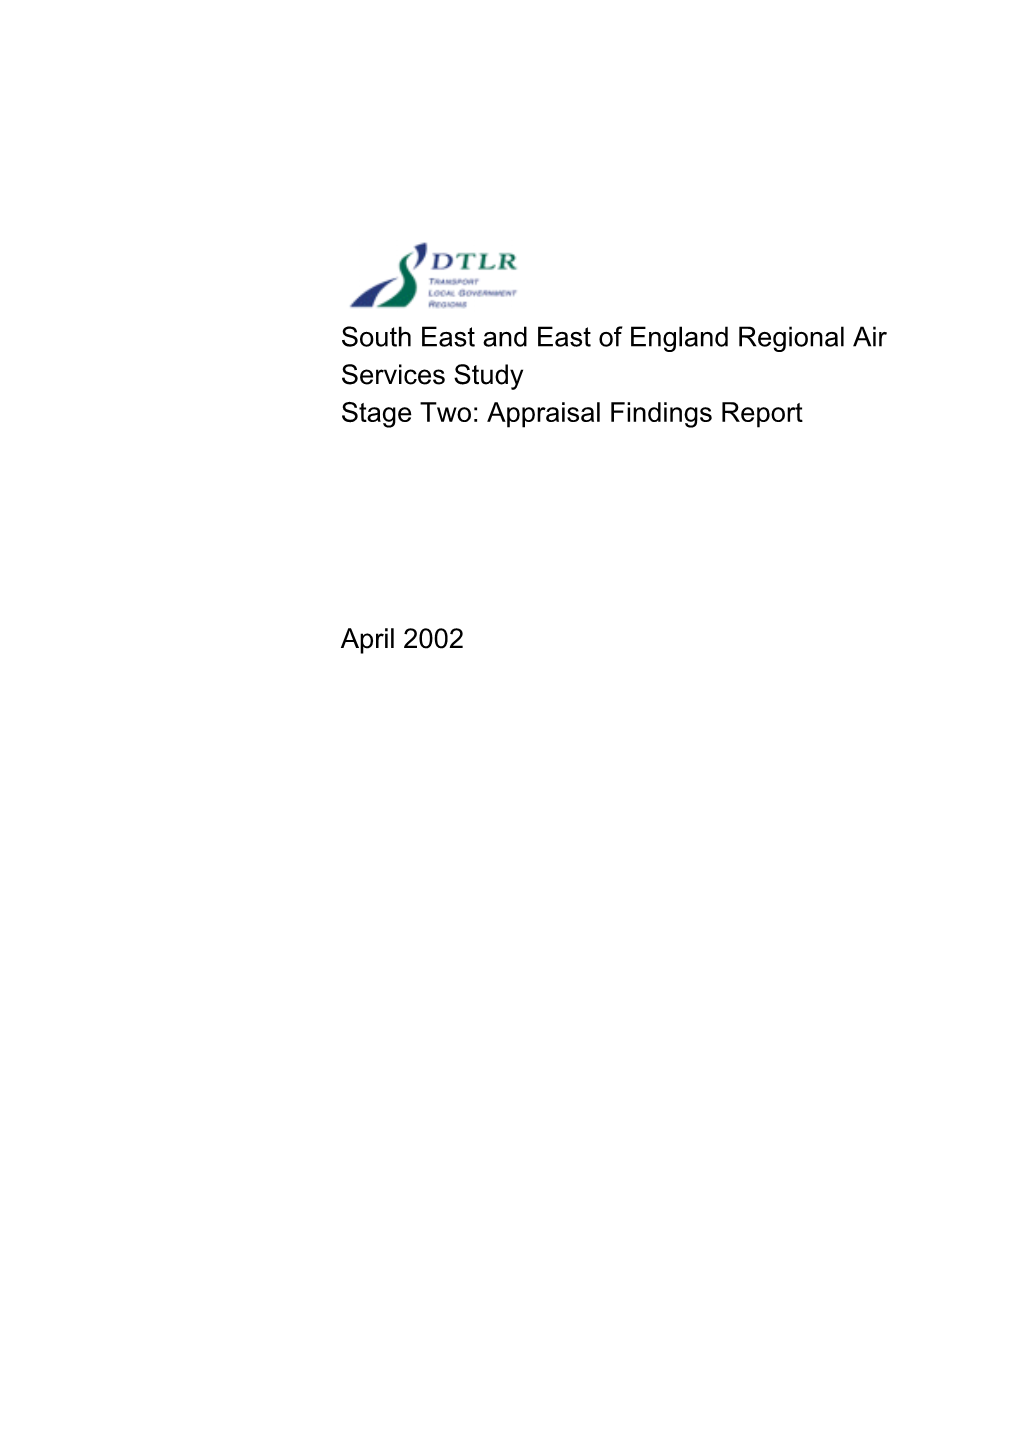 South East and East of England Regional Air Services Study Stage Two: Appraisal Findings Report